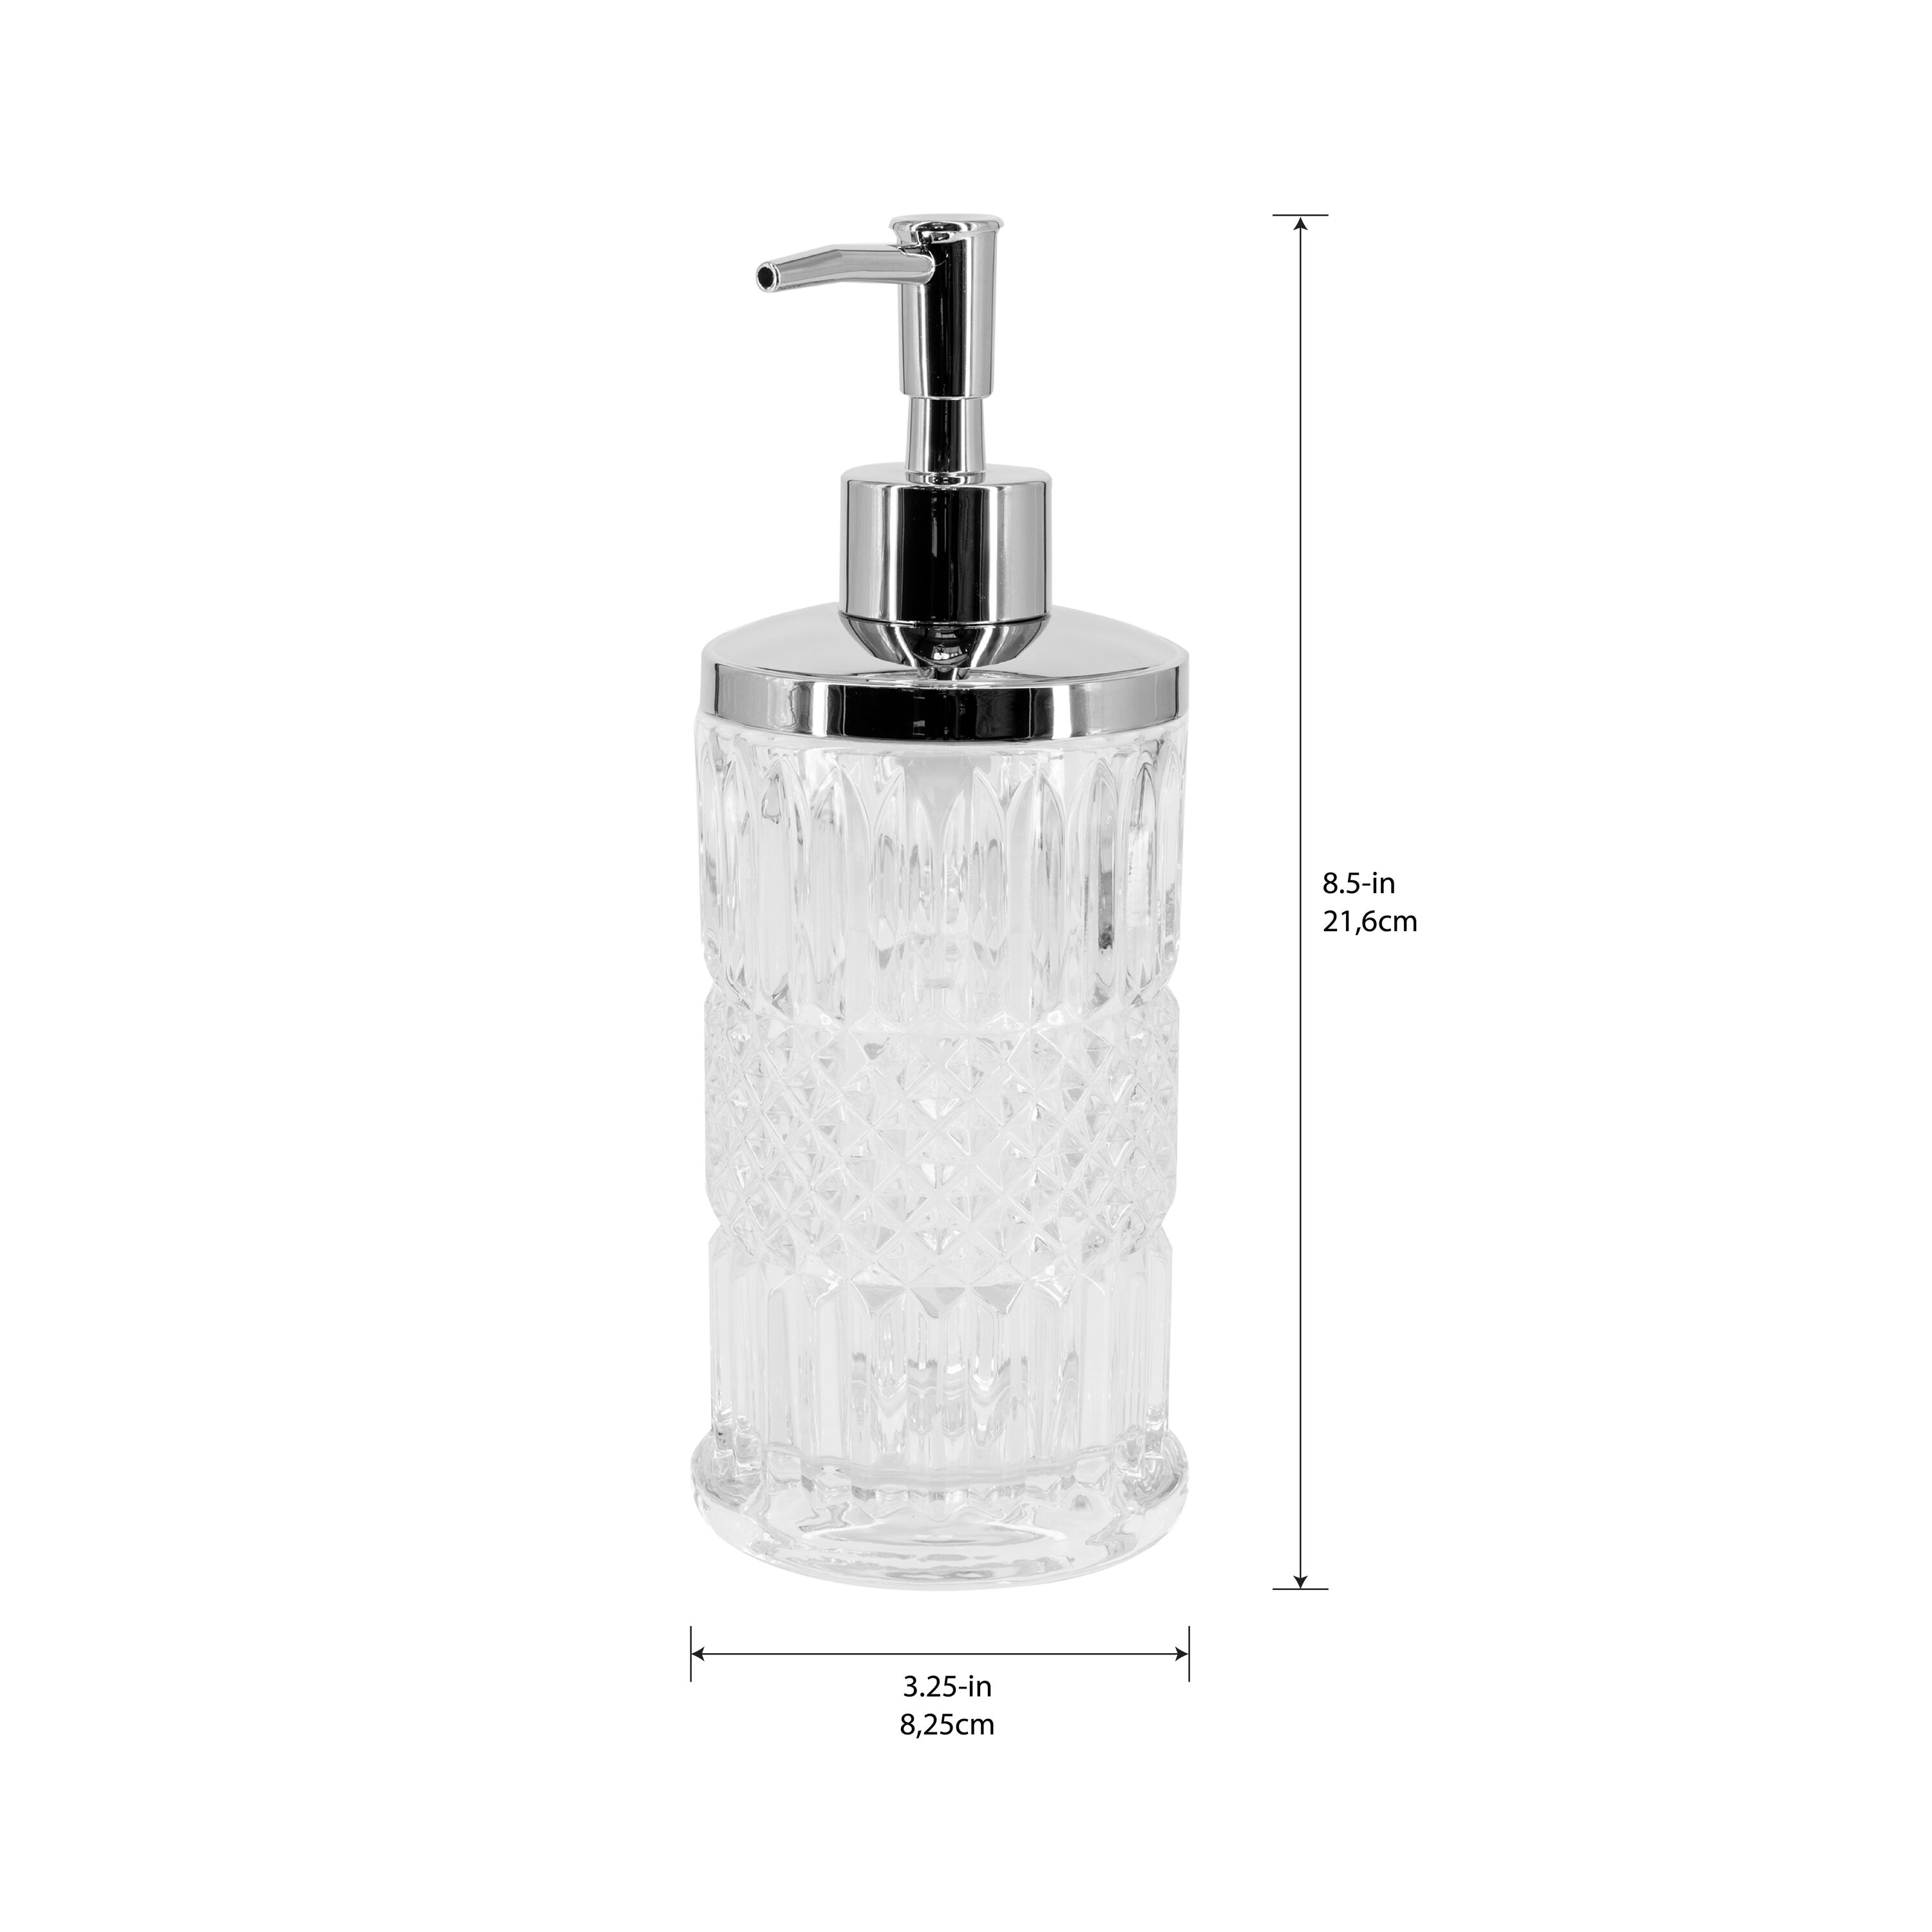 9 Inch Tall Soap & Lotion Dispensers at 